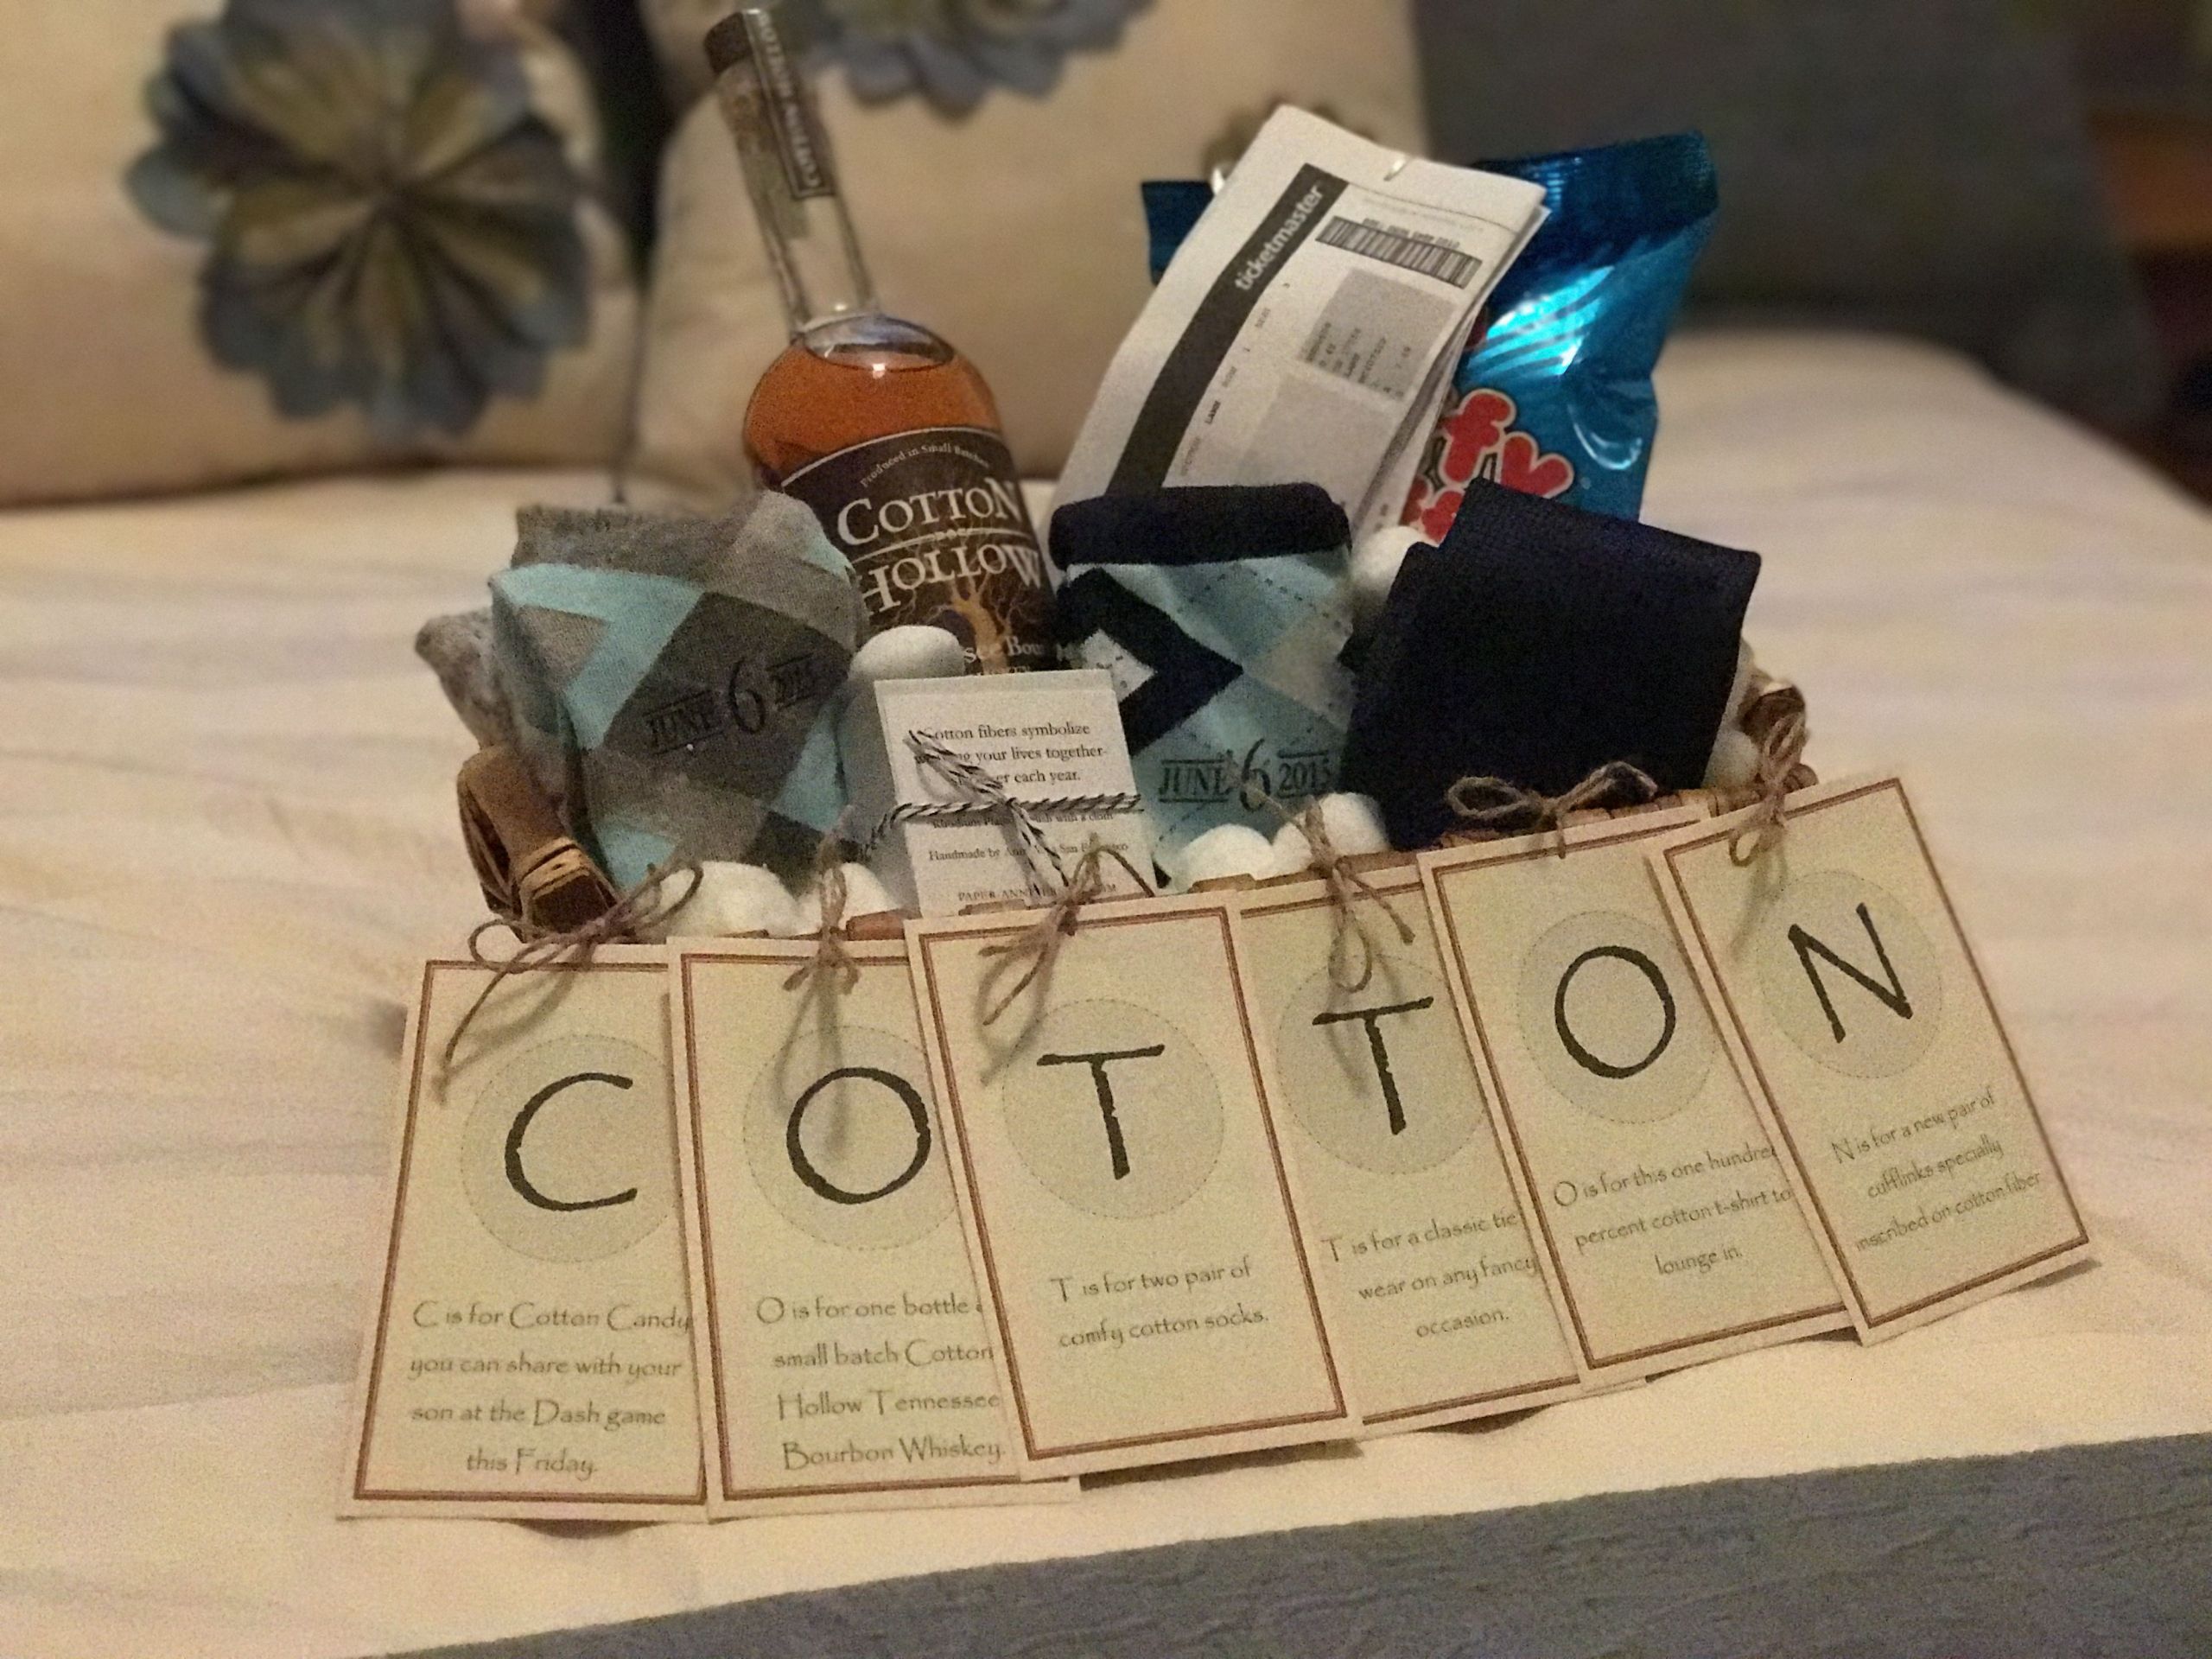 Wedding Gift For Second Marriage
 The "Cotton" Anniversary Gift for Him